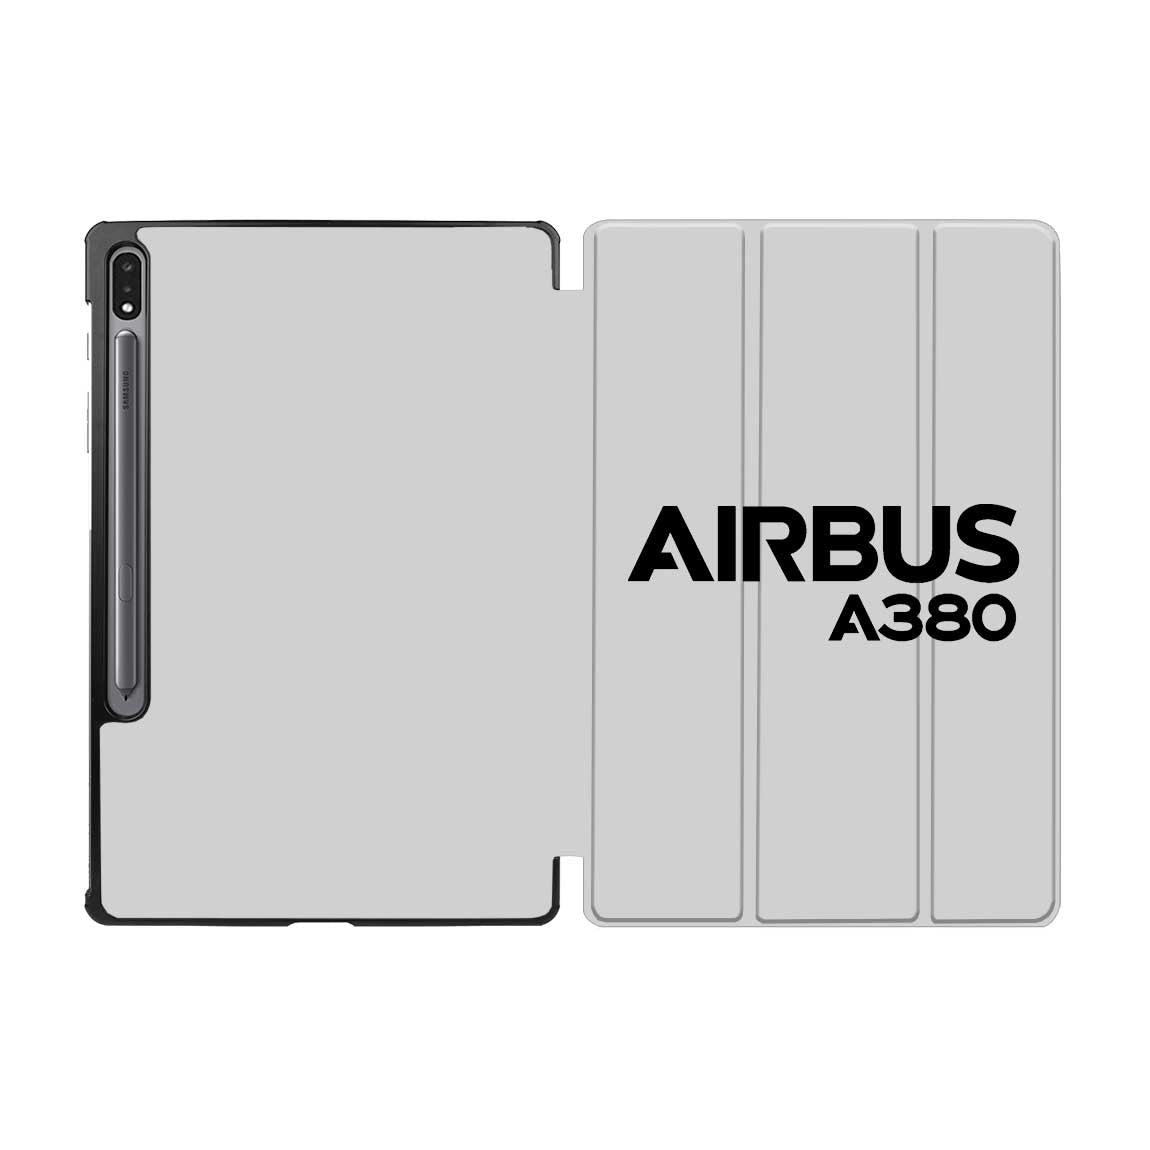 Airbus A380 & Text Designed Samsung Tablet Cases